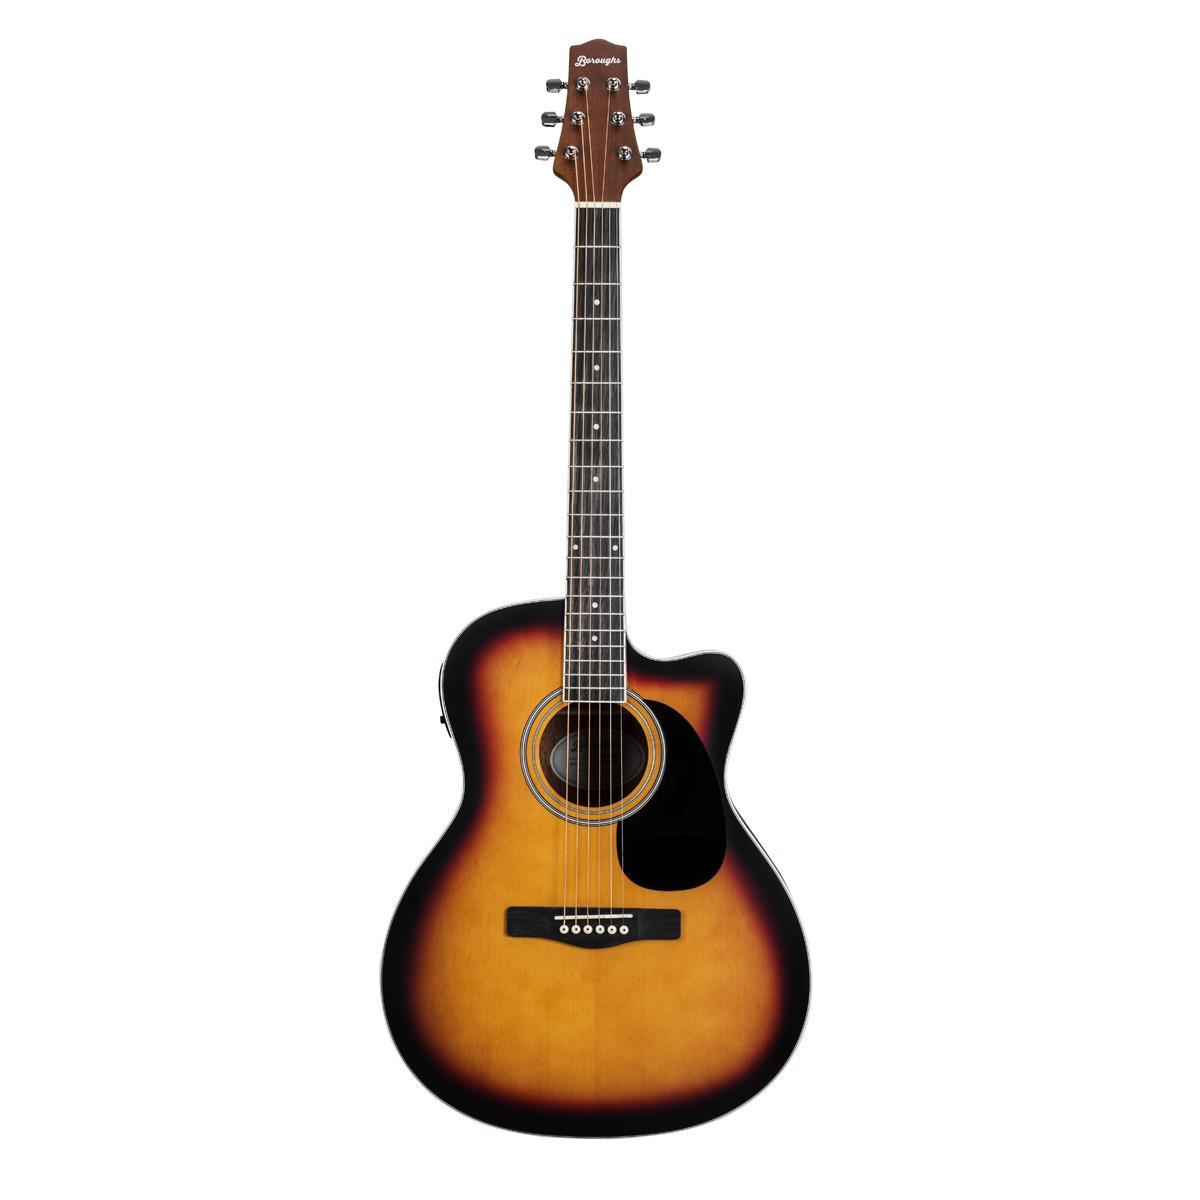 Boroughs Auditorium Acoustic Electric Guitar for $89 Shipped